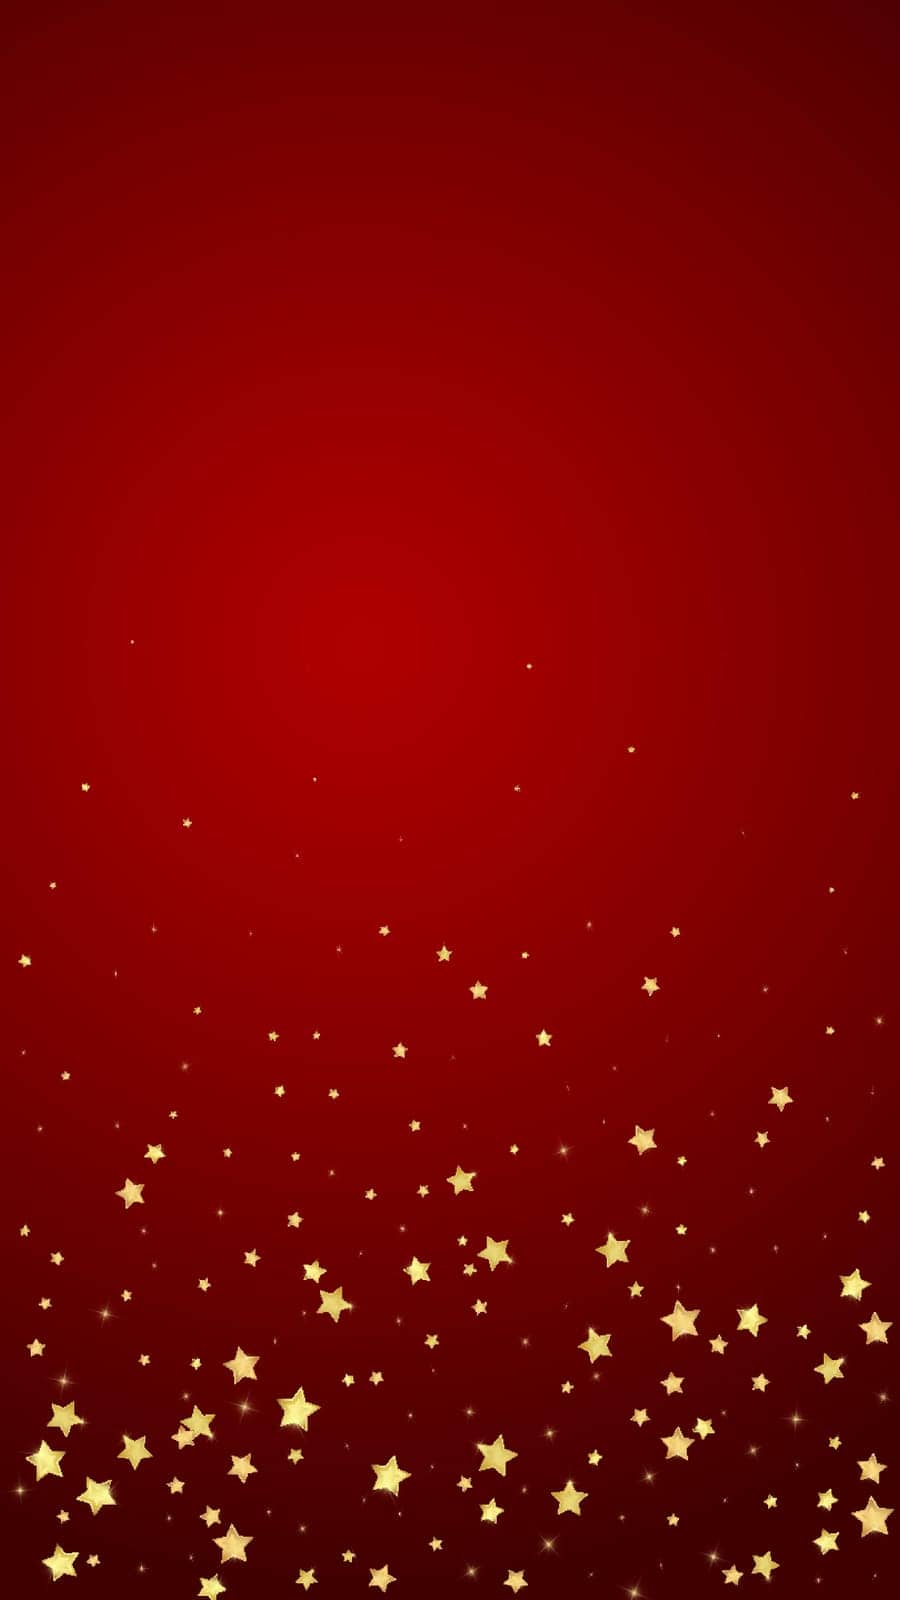 Magic stars vector overlay. Gold stars scattered around randomly, falling down, floating. Chaotic dreamy childish overlay template. Enchanting vector with magic stars on red background.